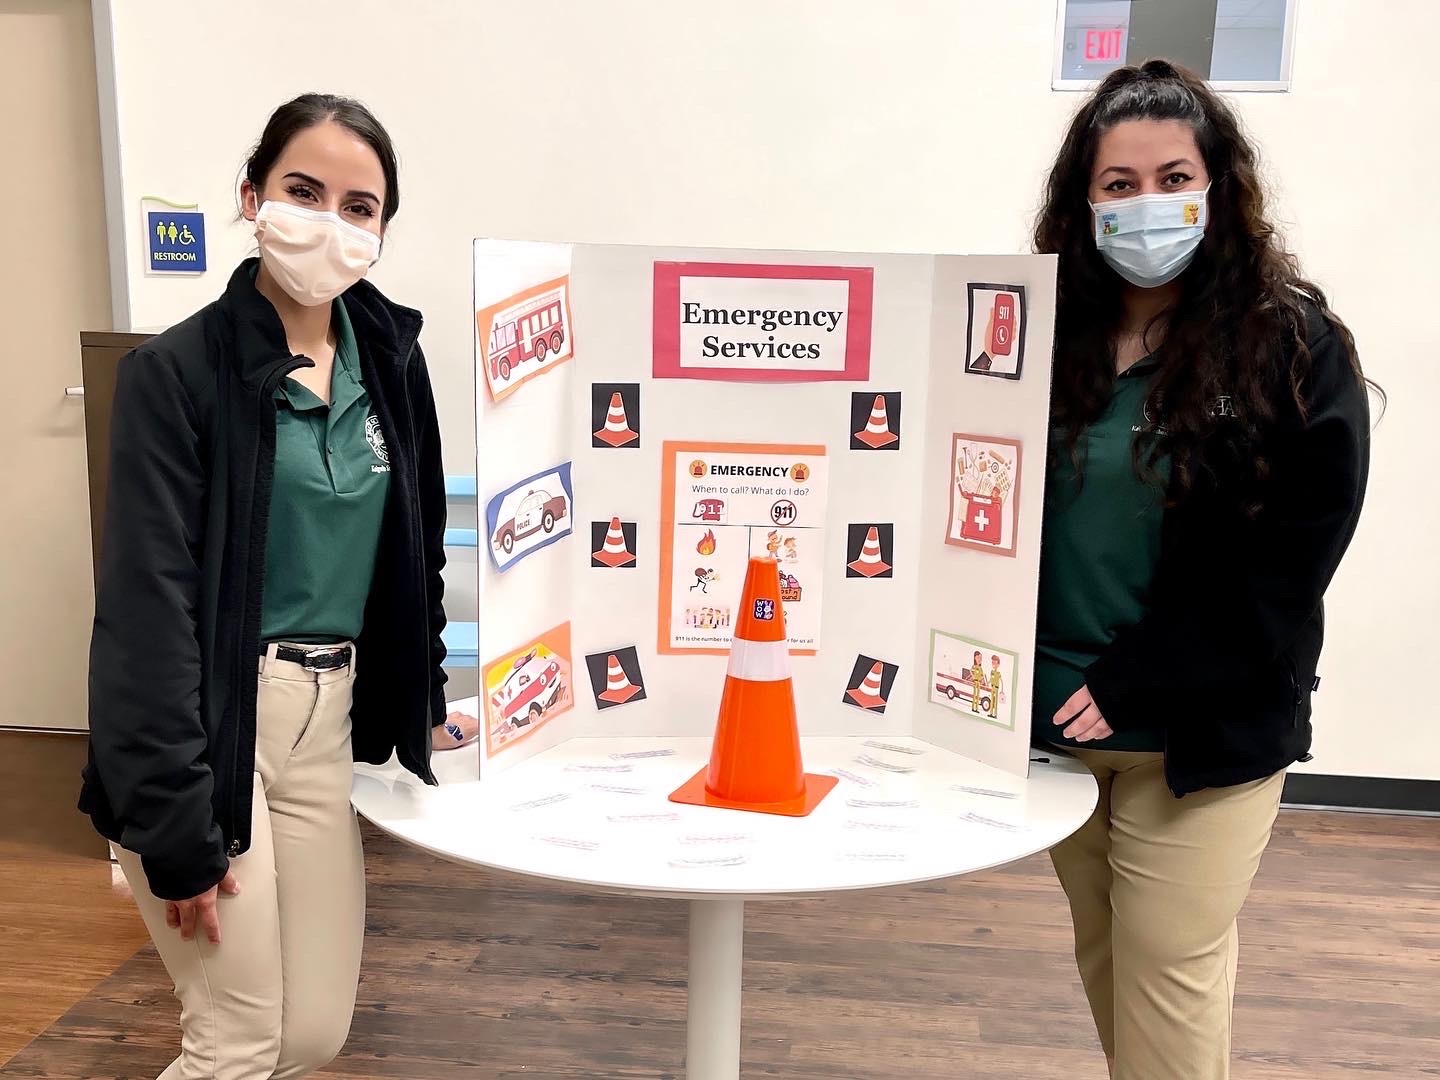 Two female students standing with a poster-board presentation on Emergency Services